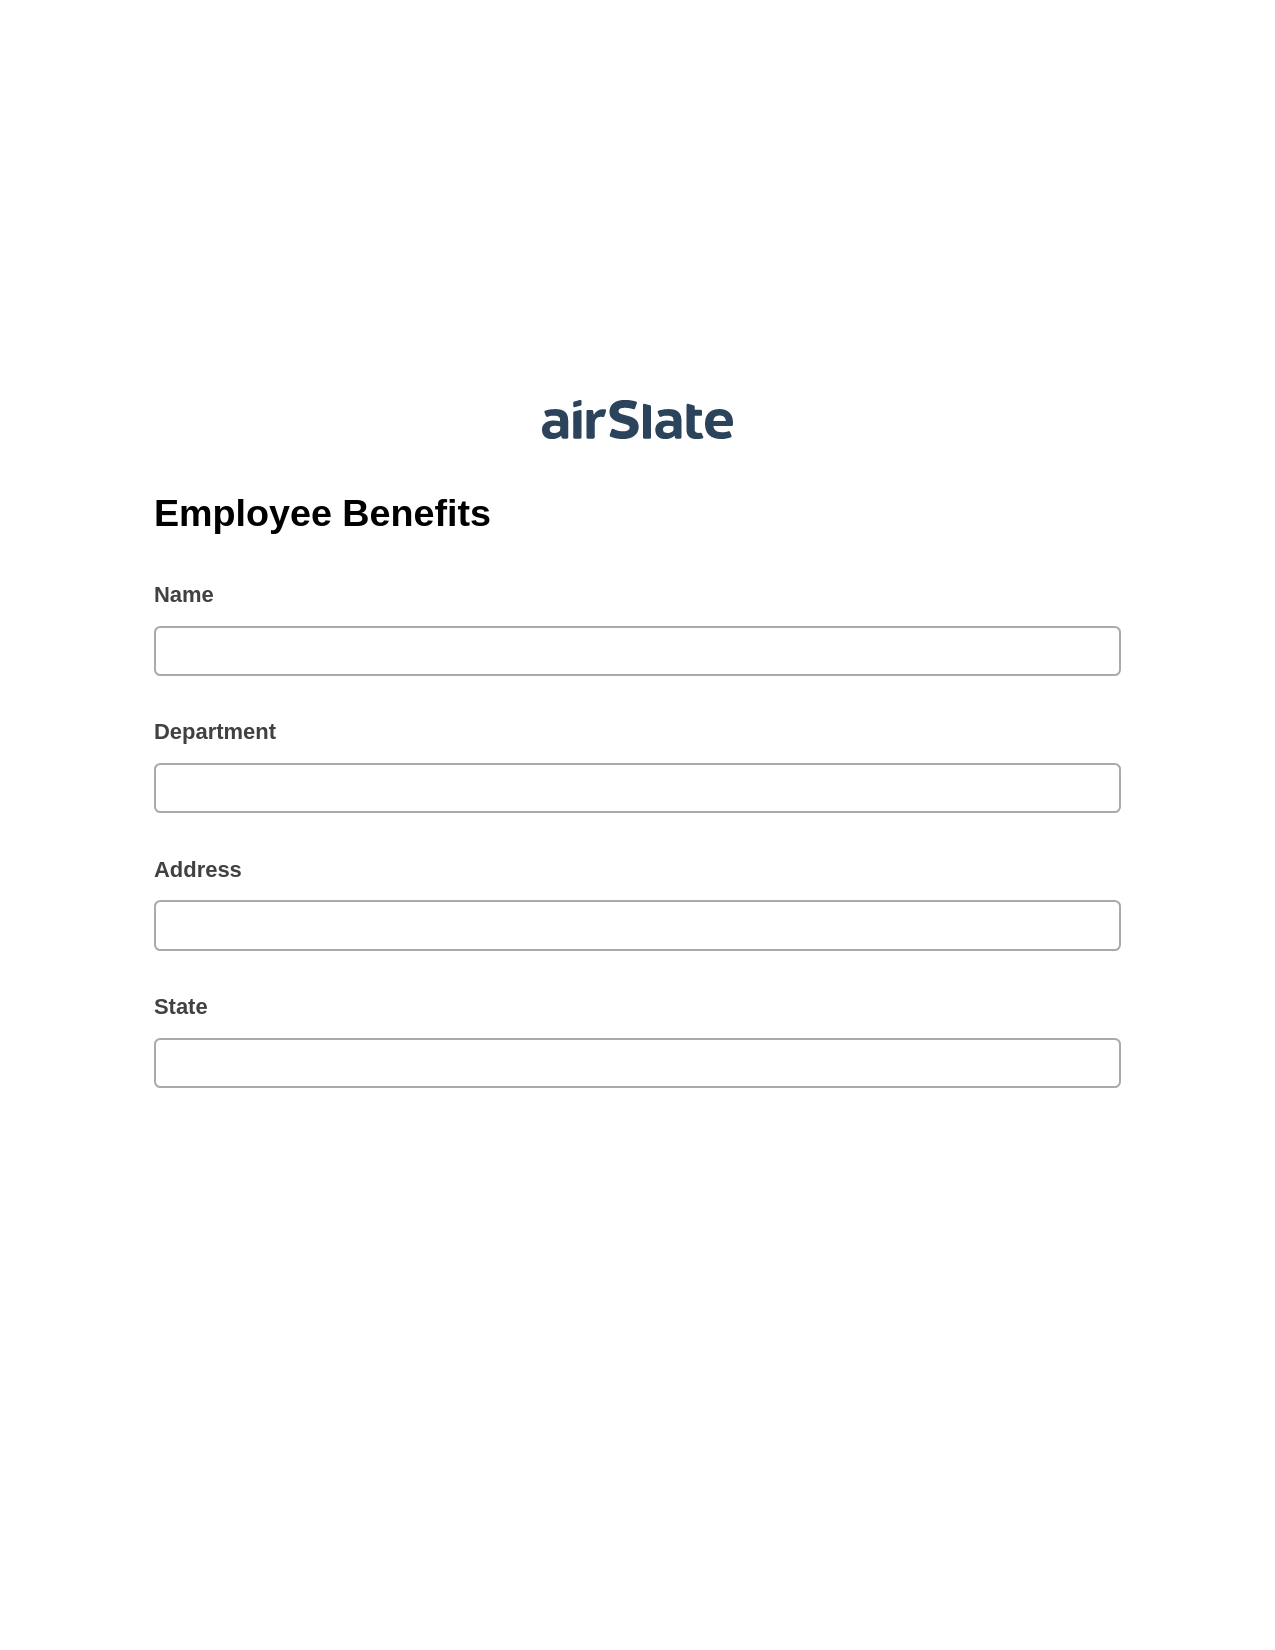 Multirole Employee Benefits Pre-fill from Salesforce Record Bot, Email Notification Bot, Export to Formstack Documents Bot